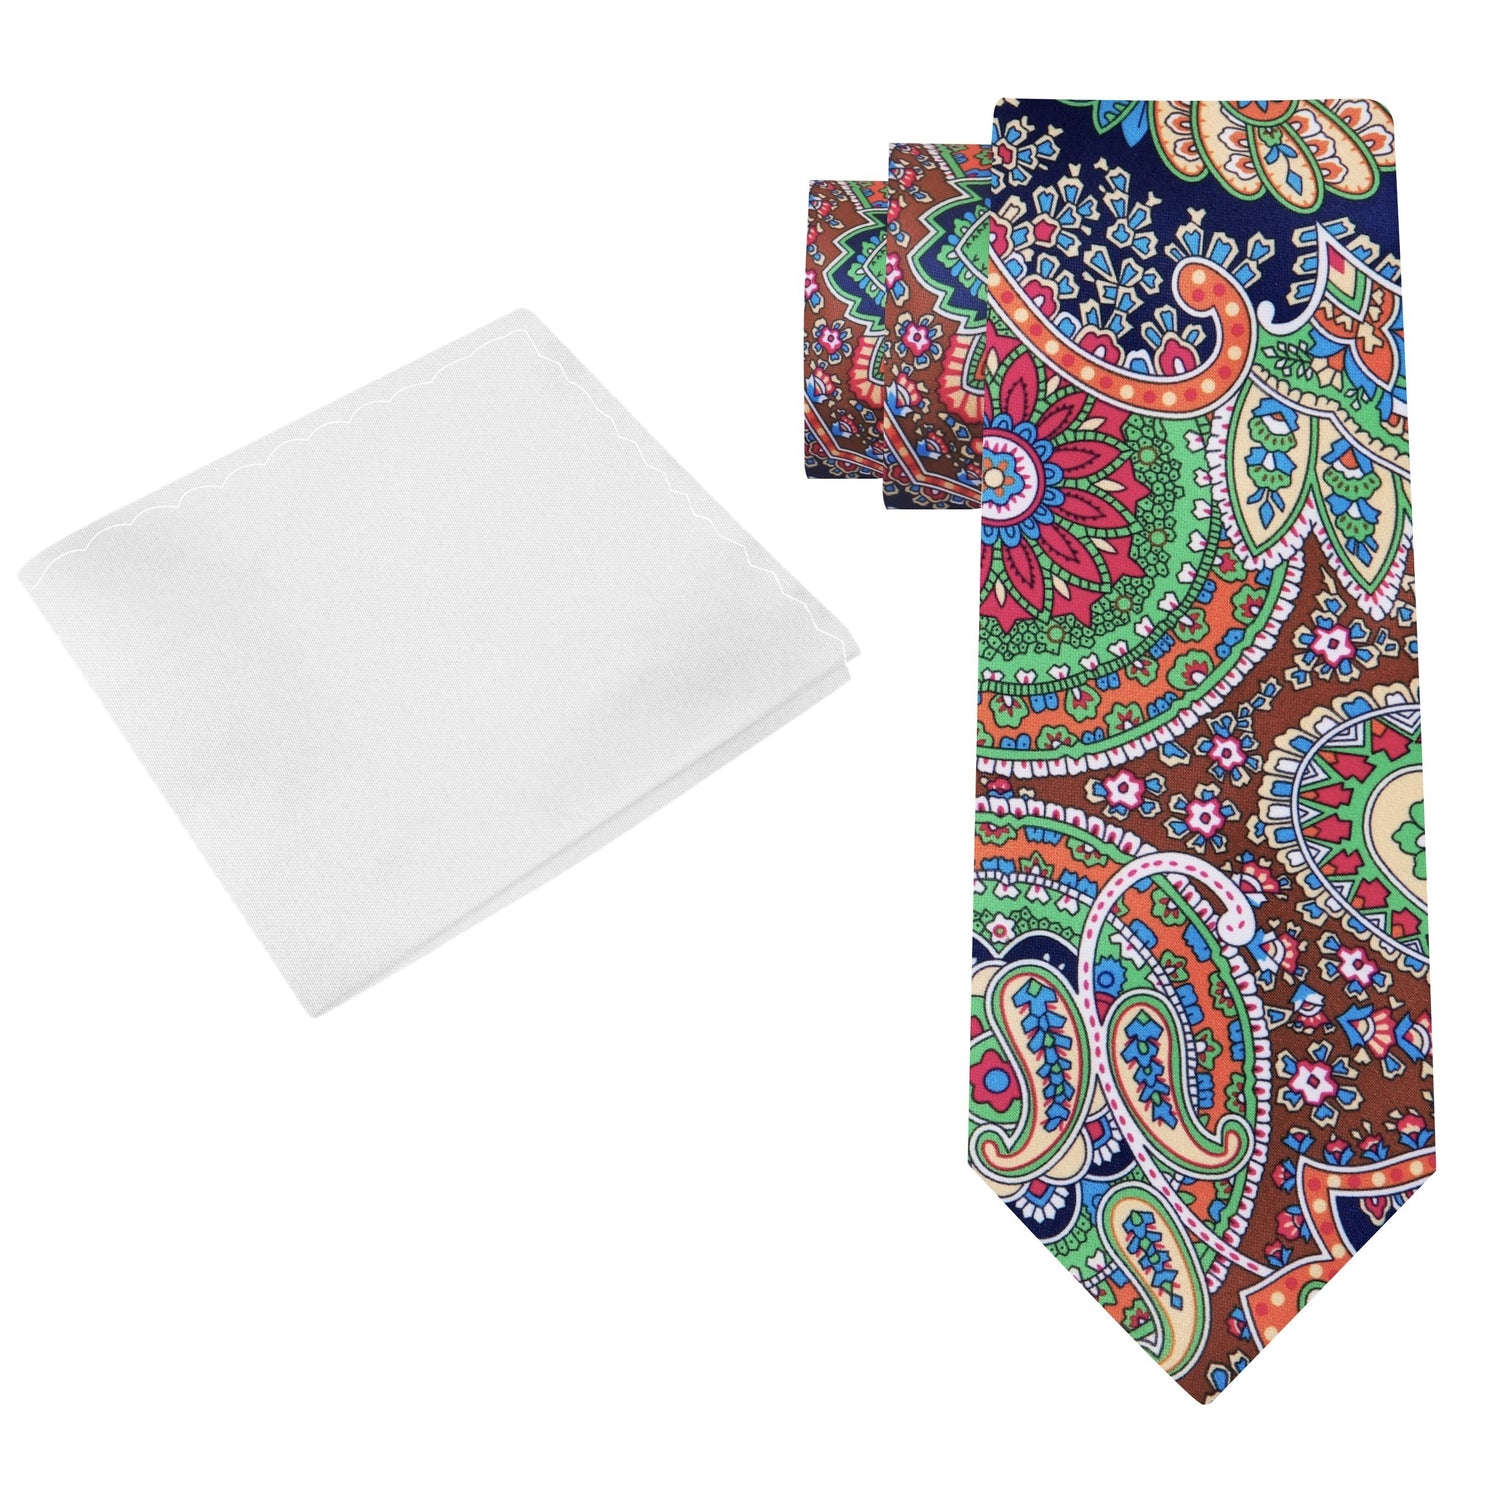 Alt View: Green, Brown, Blue, Red Paisley Abstract Tie and White Square